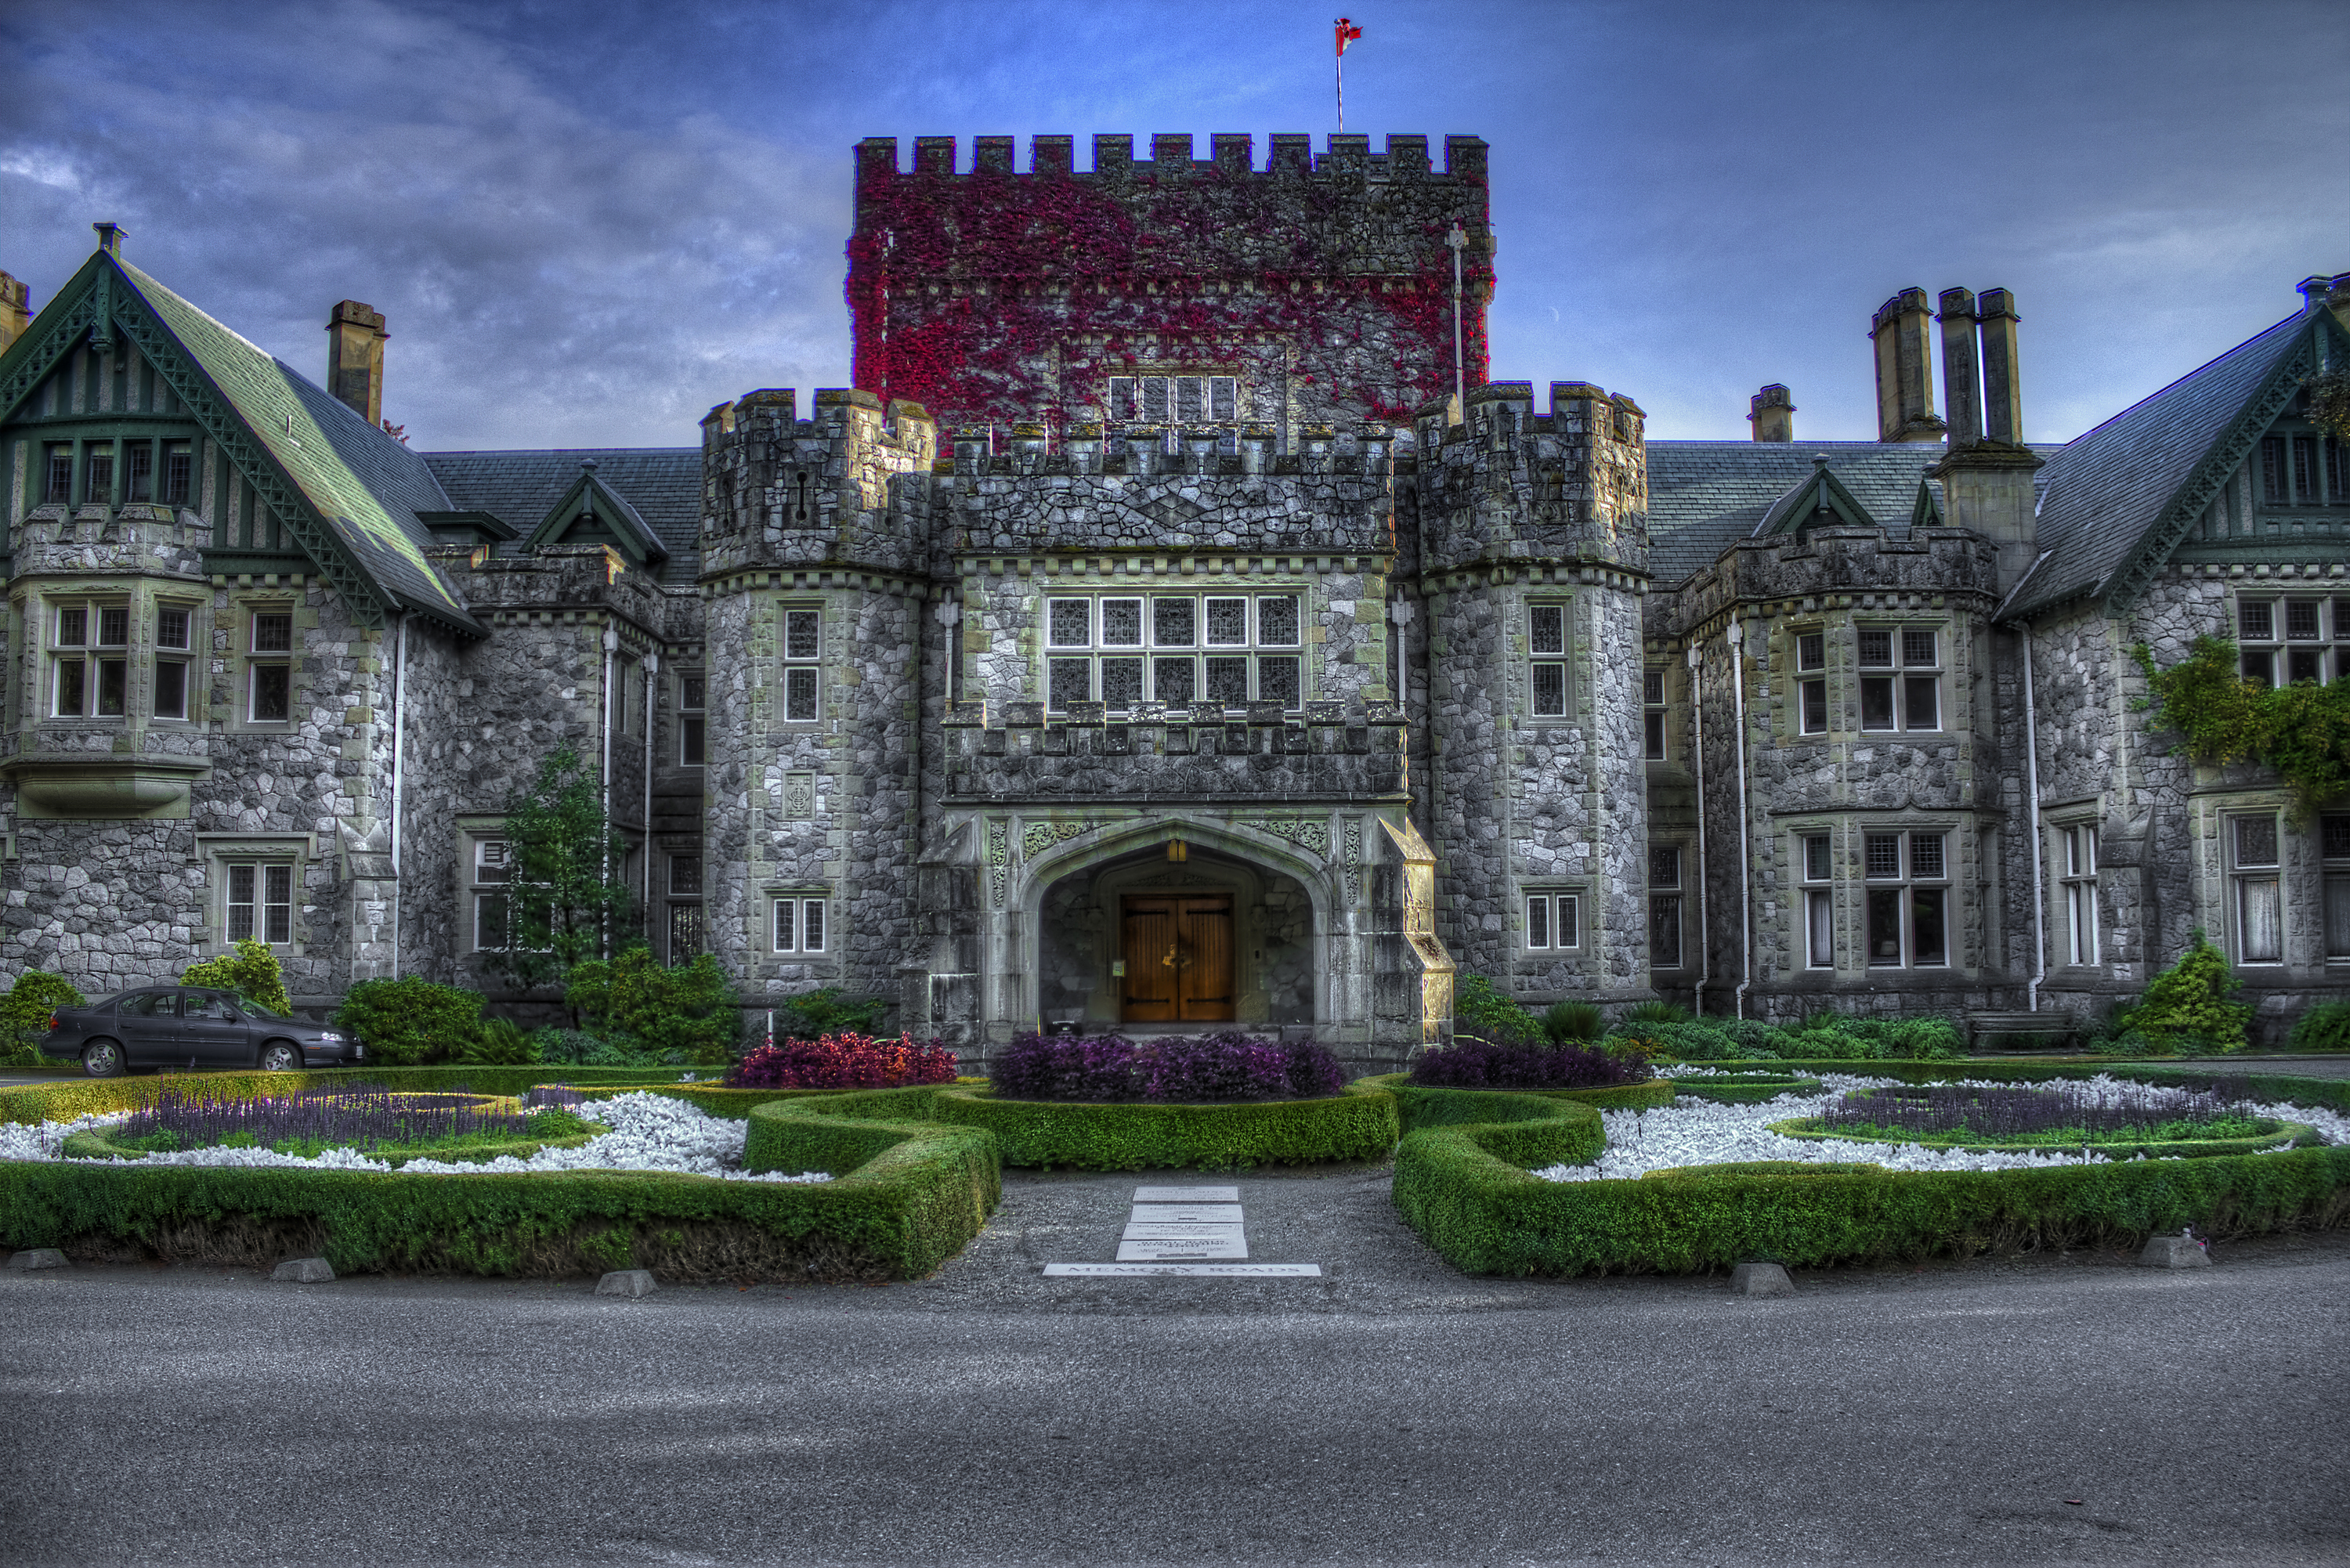 palaces, garden, canada, man made, palace, architecture